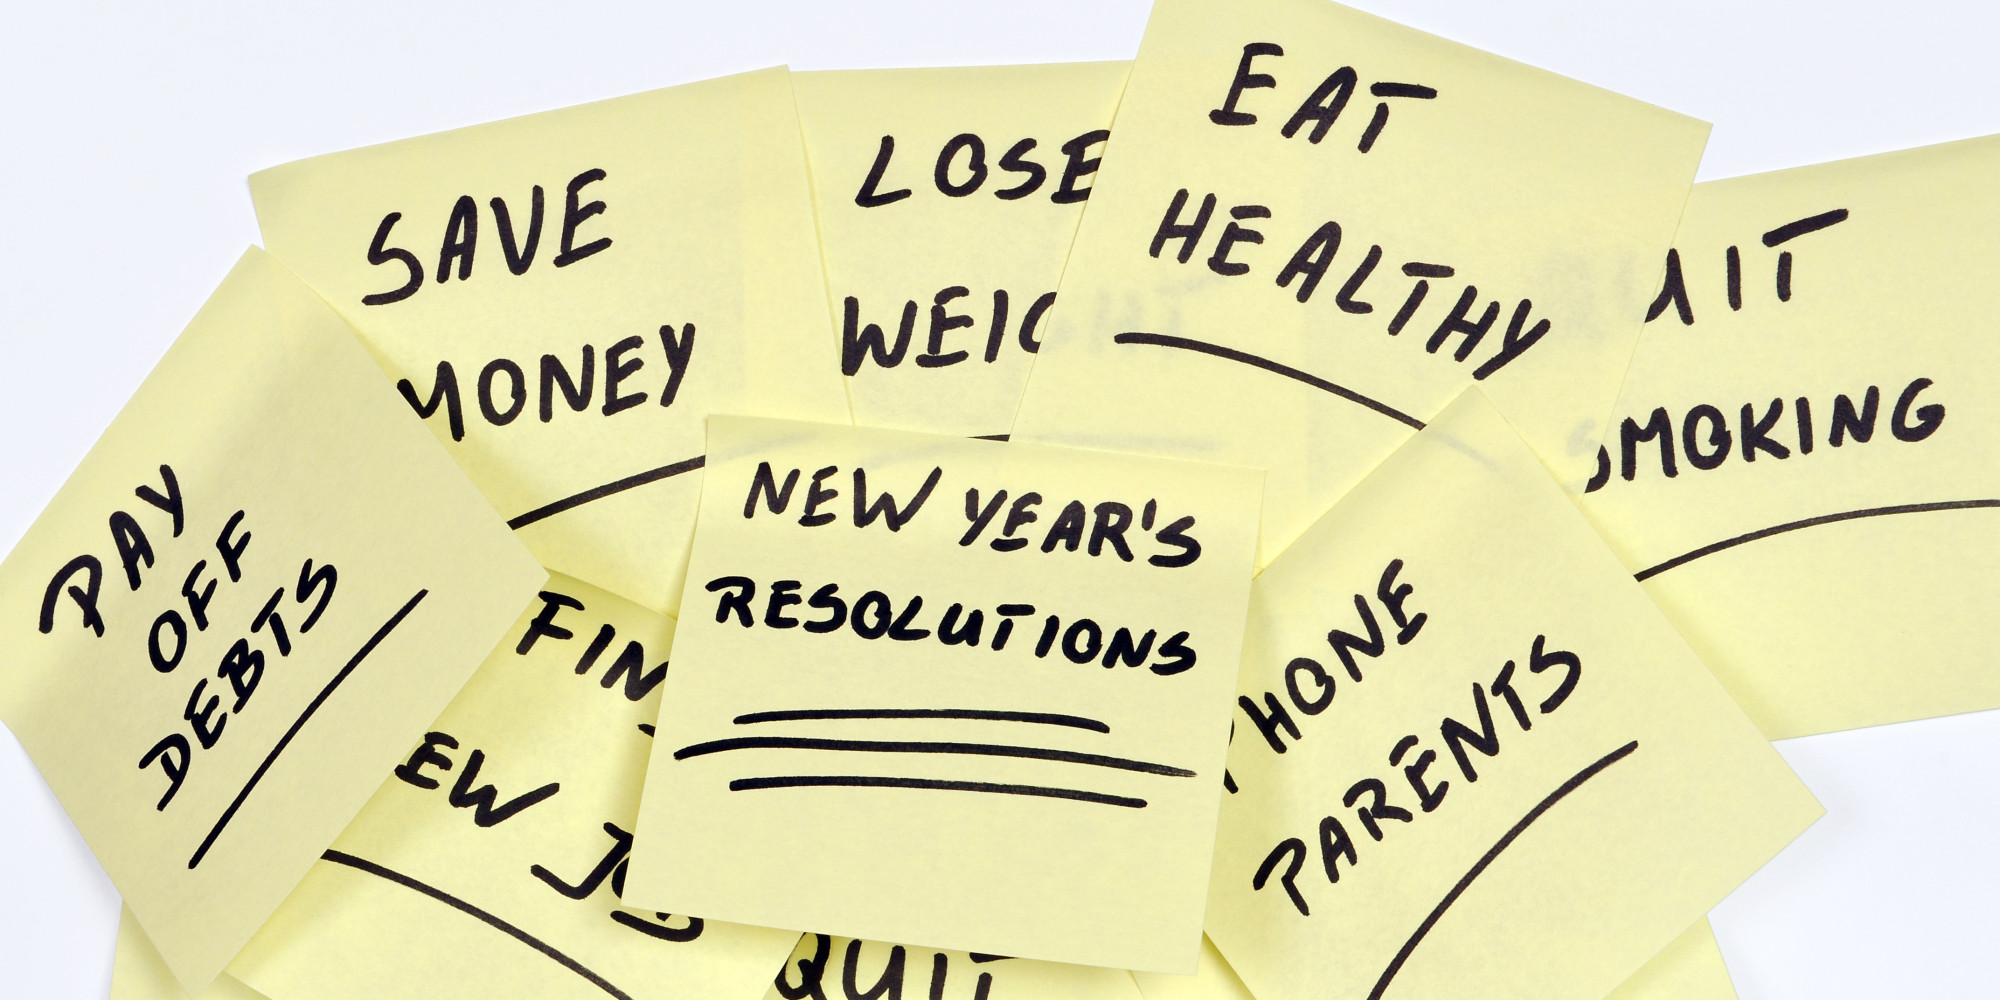 Can Your New Year’s Resolutions in 2016!